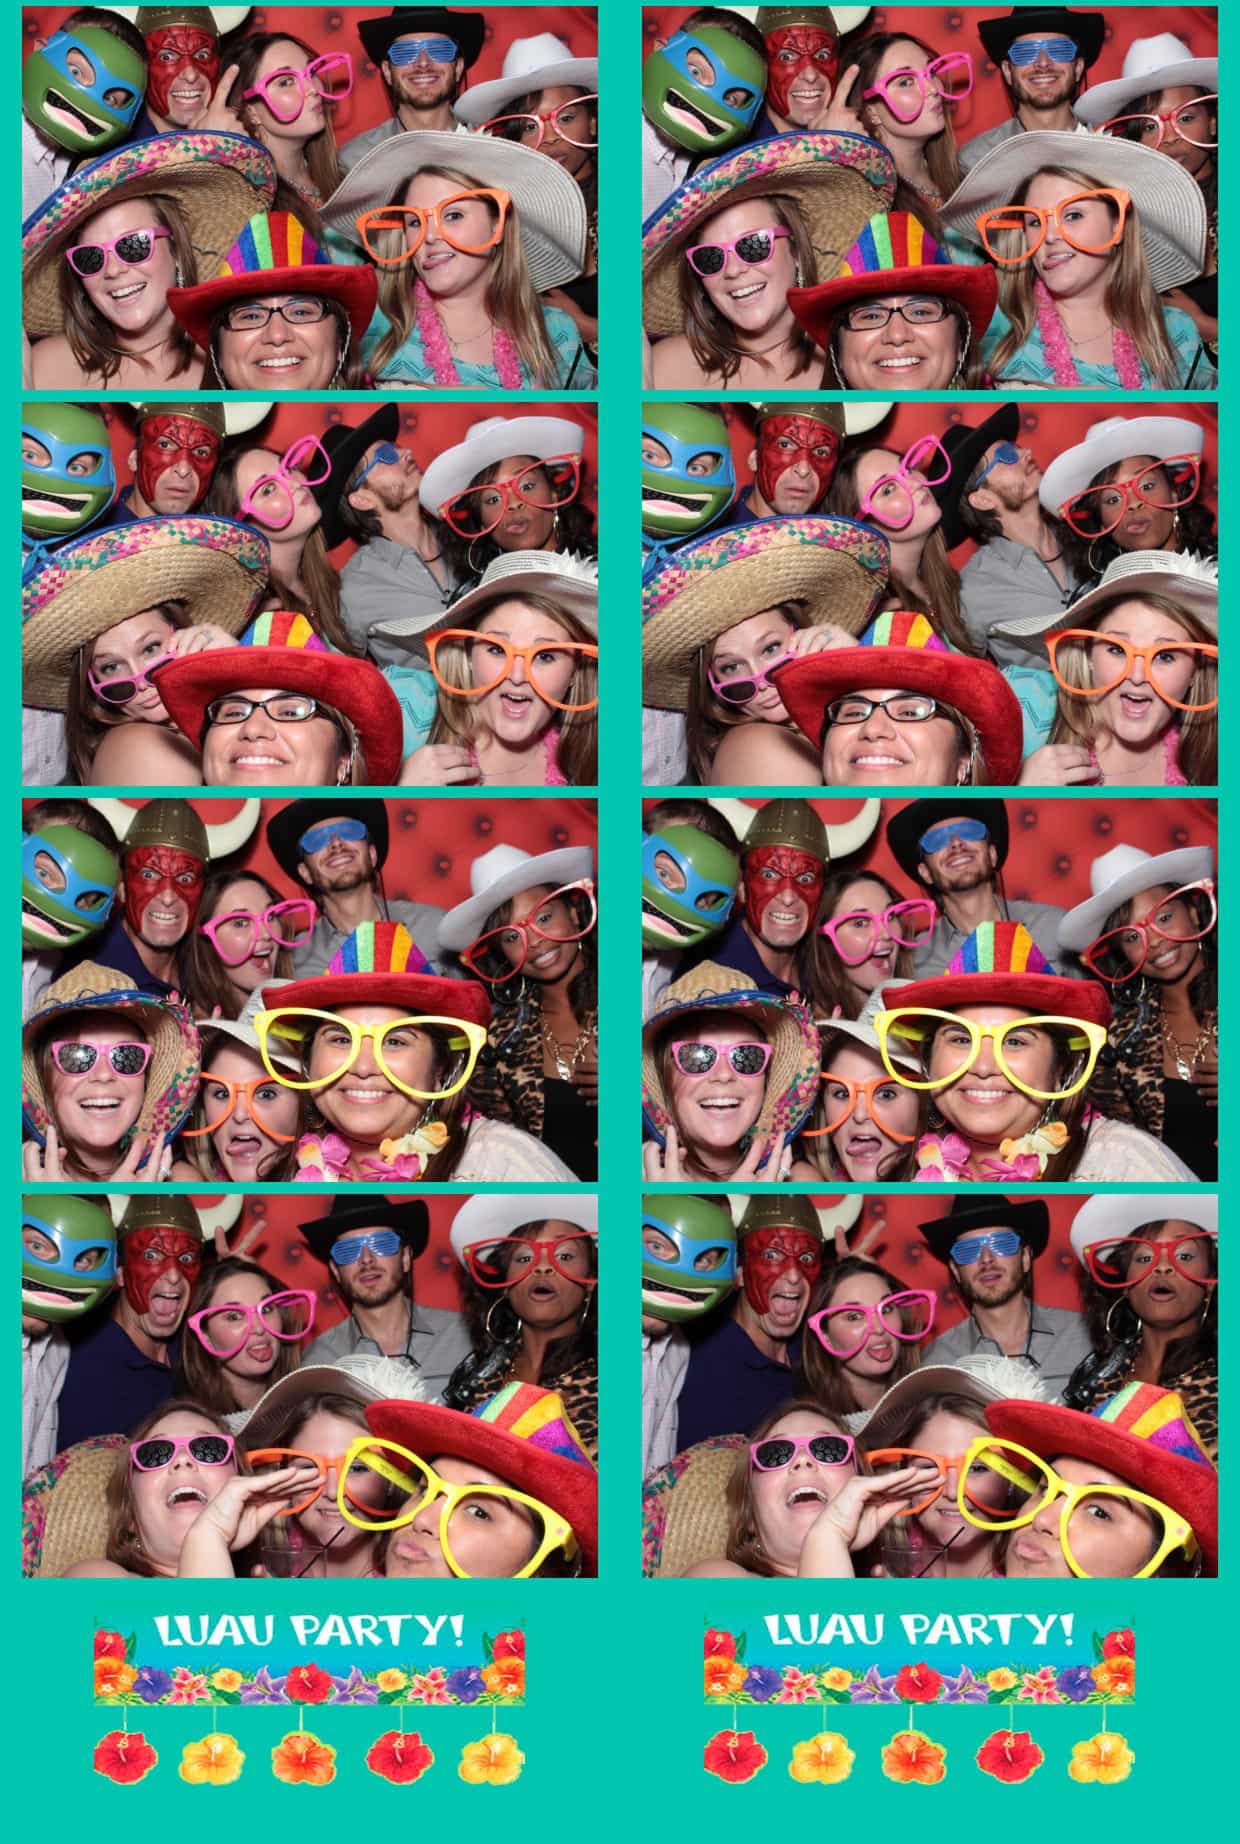 Photo-Booth-Rental-Company-Party-Celebration-Props-No.1-Affordable-Corporate-Props-Luau-Large-Groups